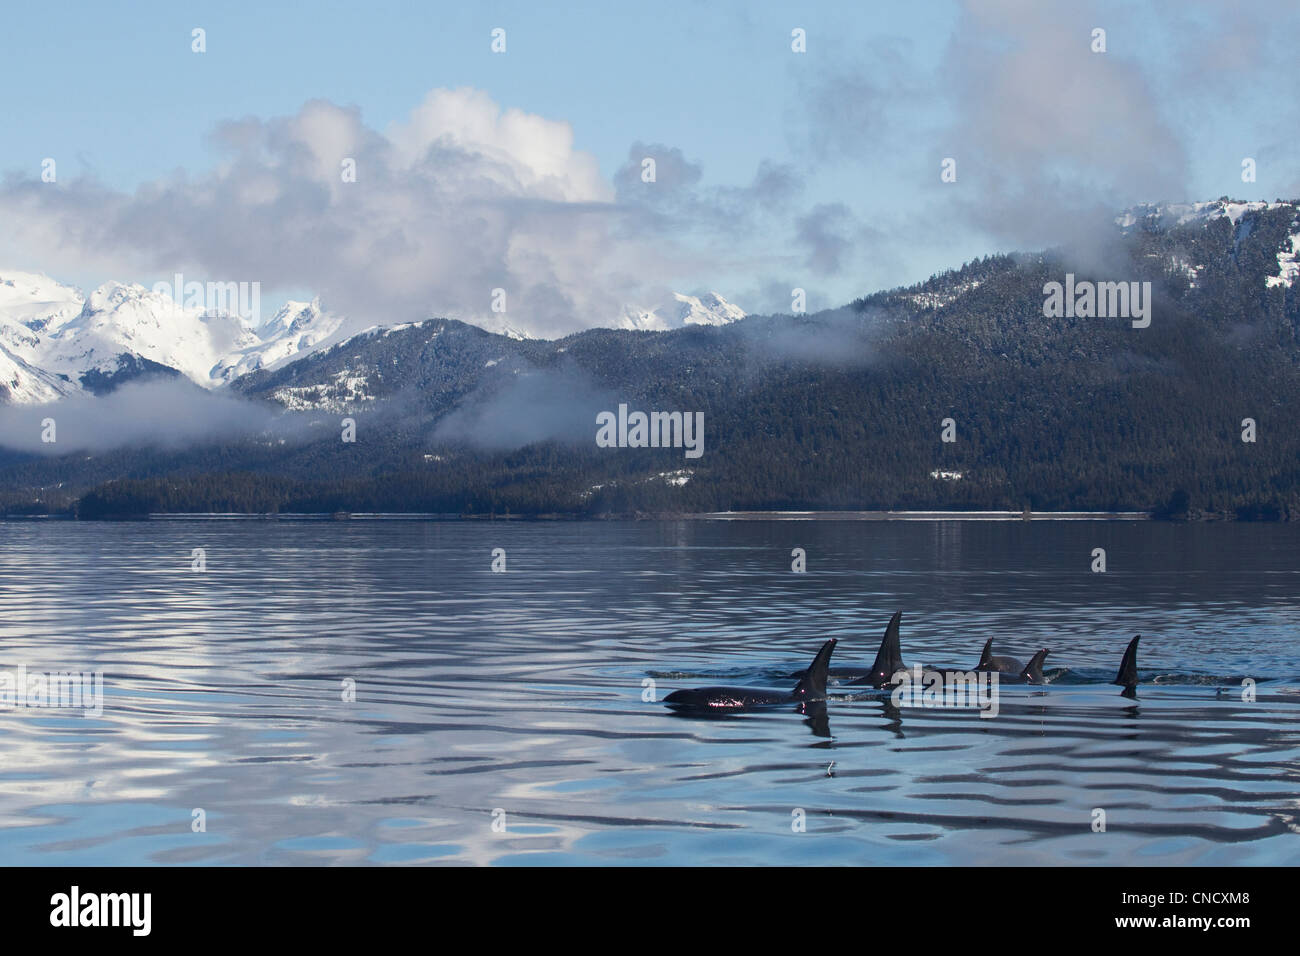 Killer Whale pod showing dorsal fins on glassy calm surface of Prince William Sound with Chugach Mountains in background, Alaska Stock Photo